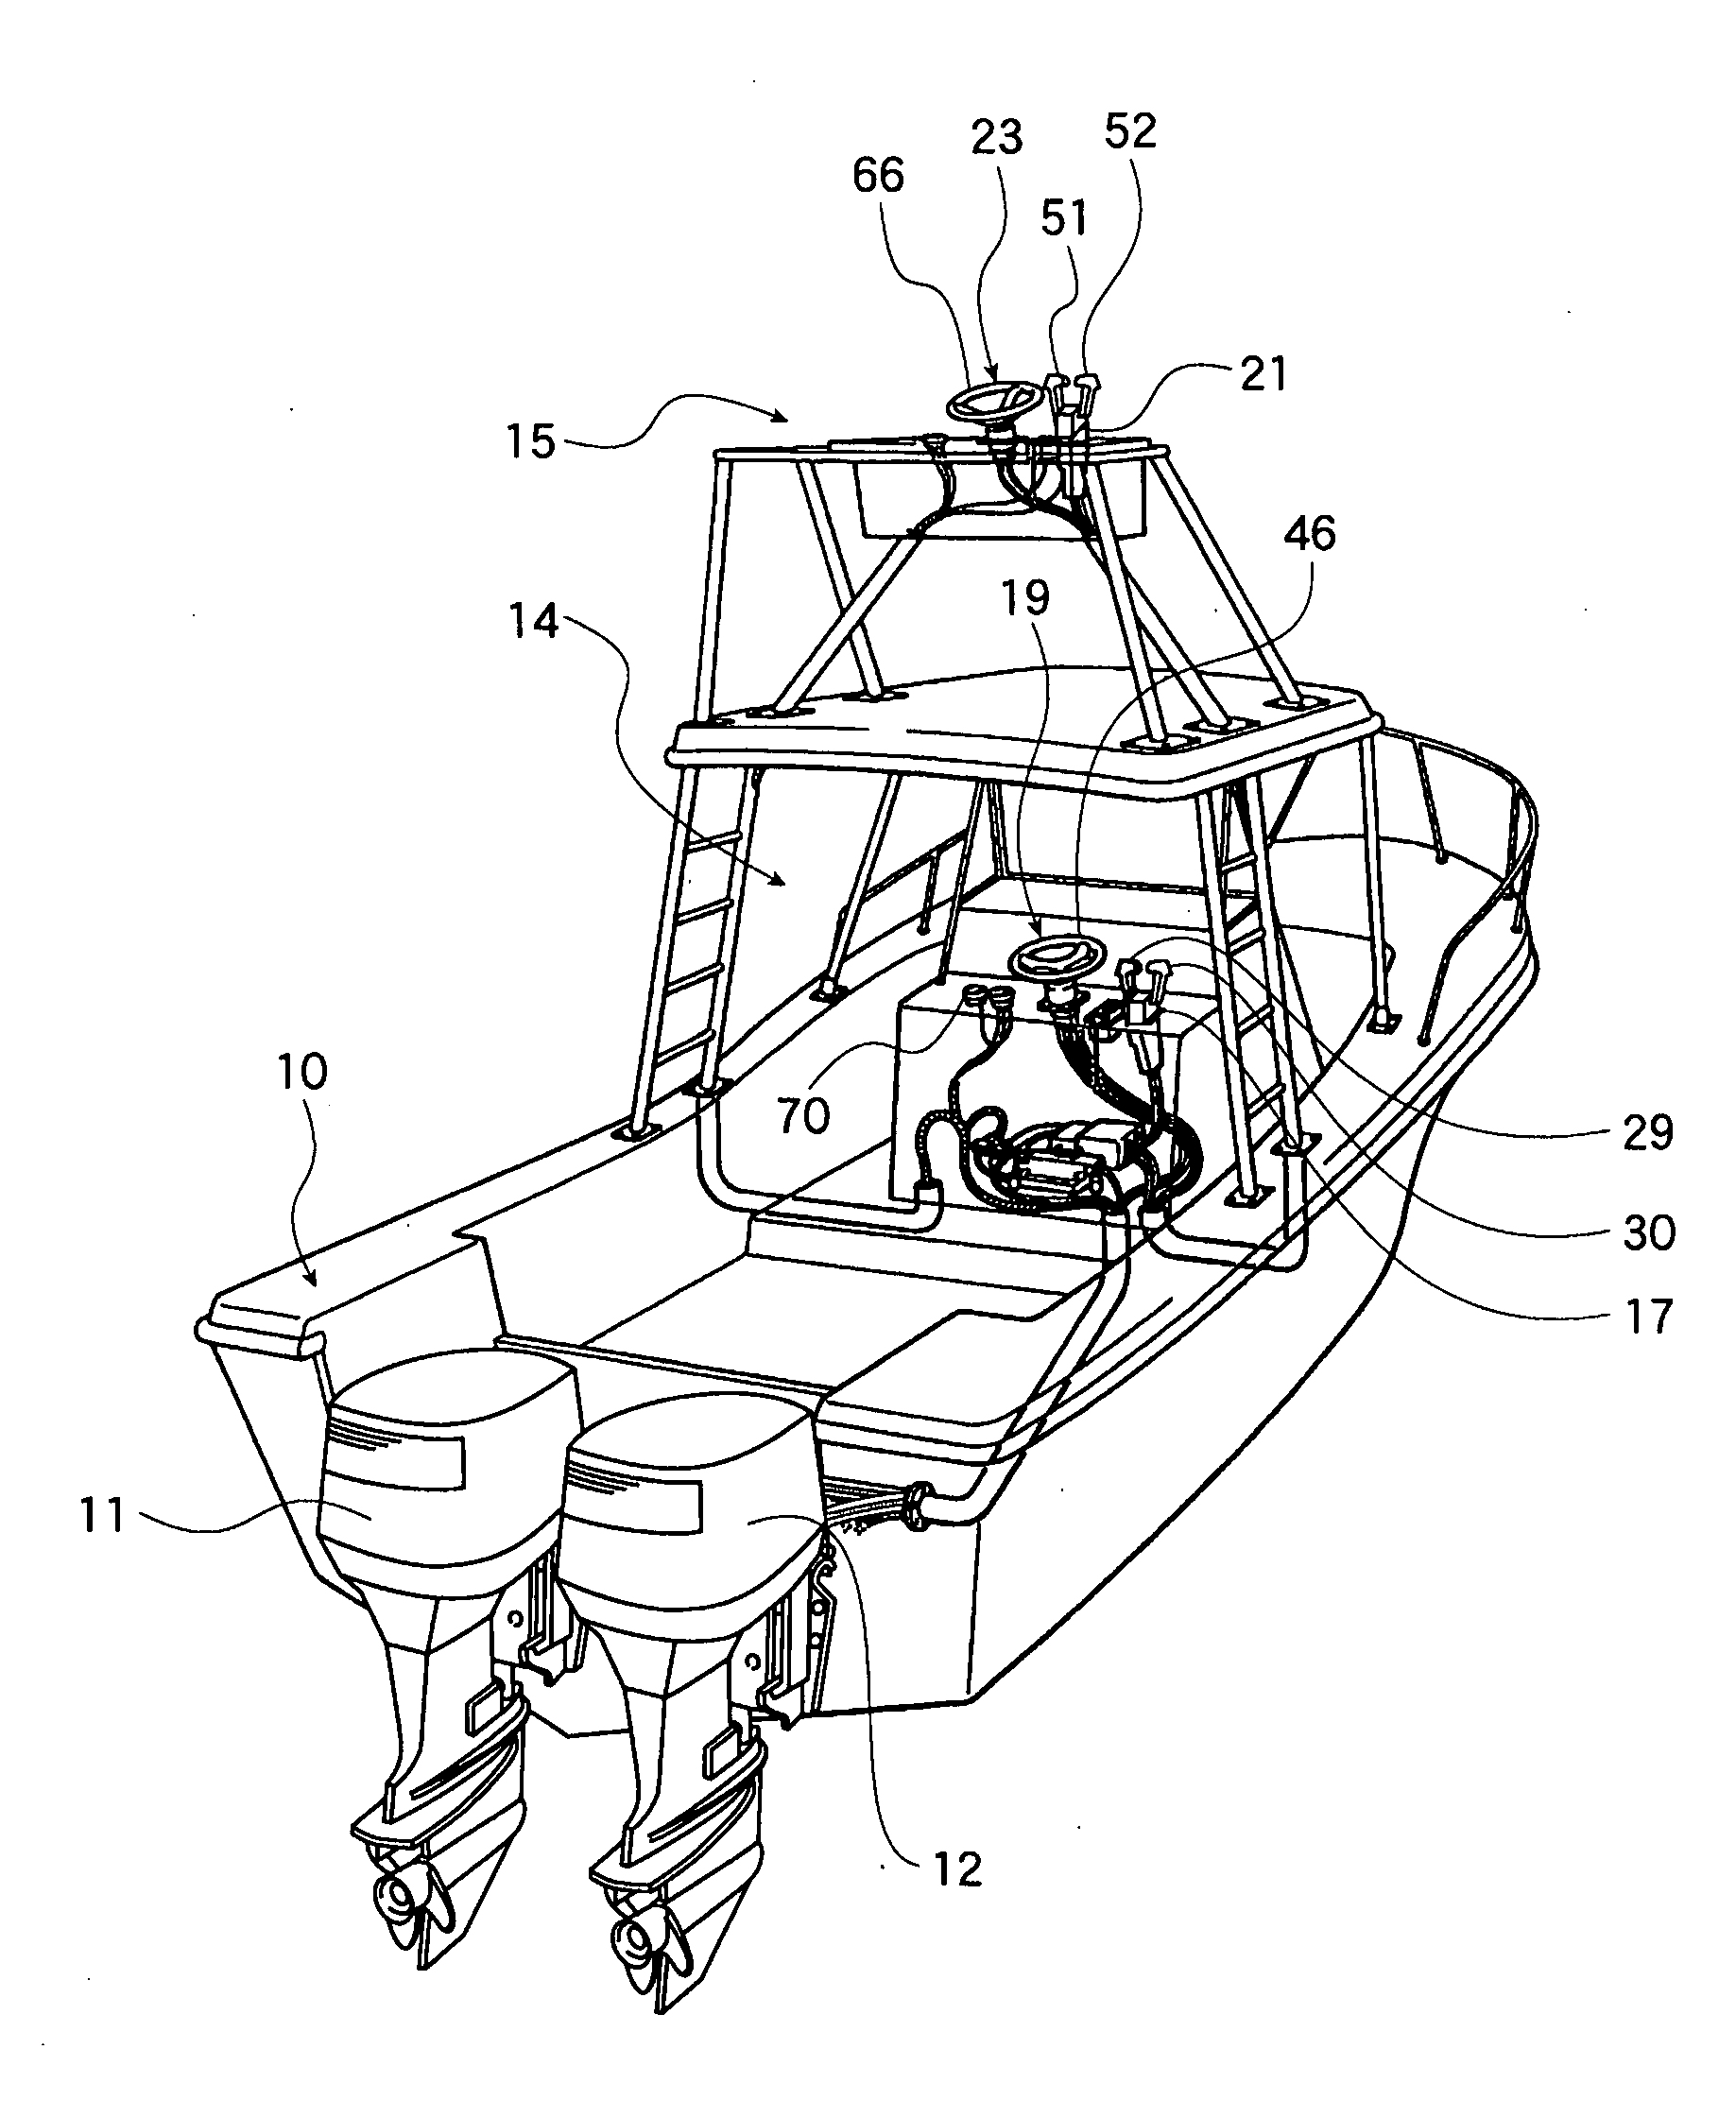 Remote control system for a watercraft